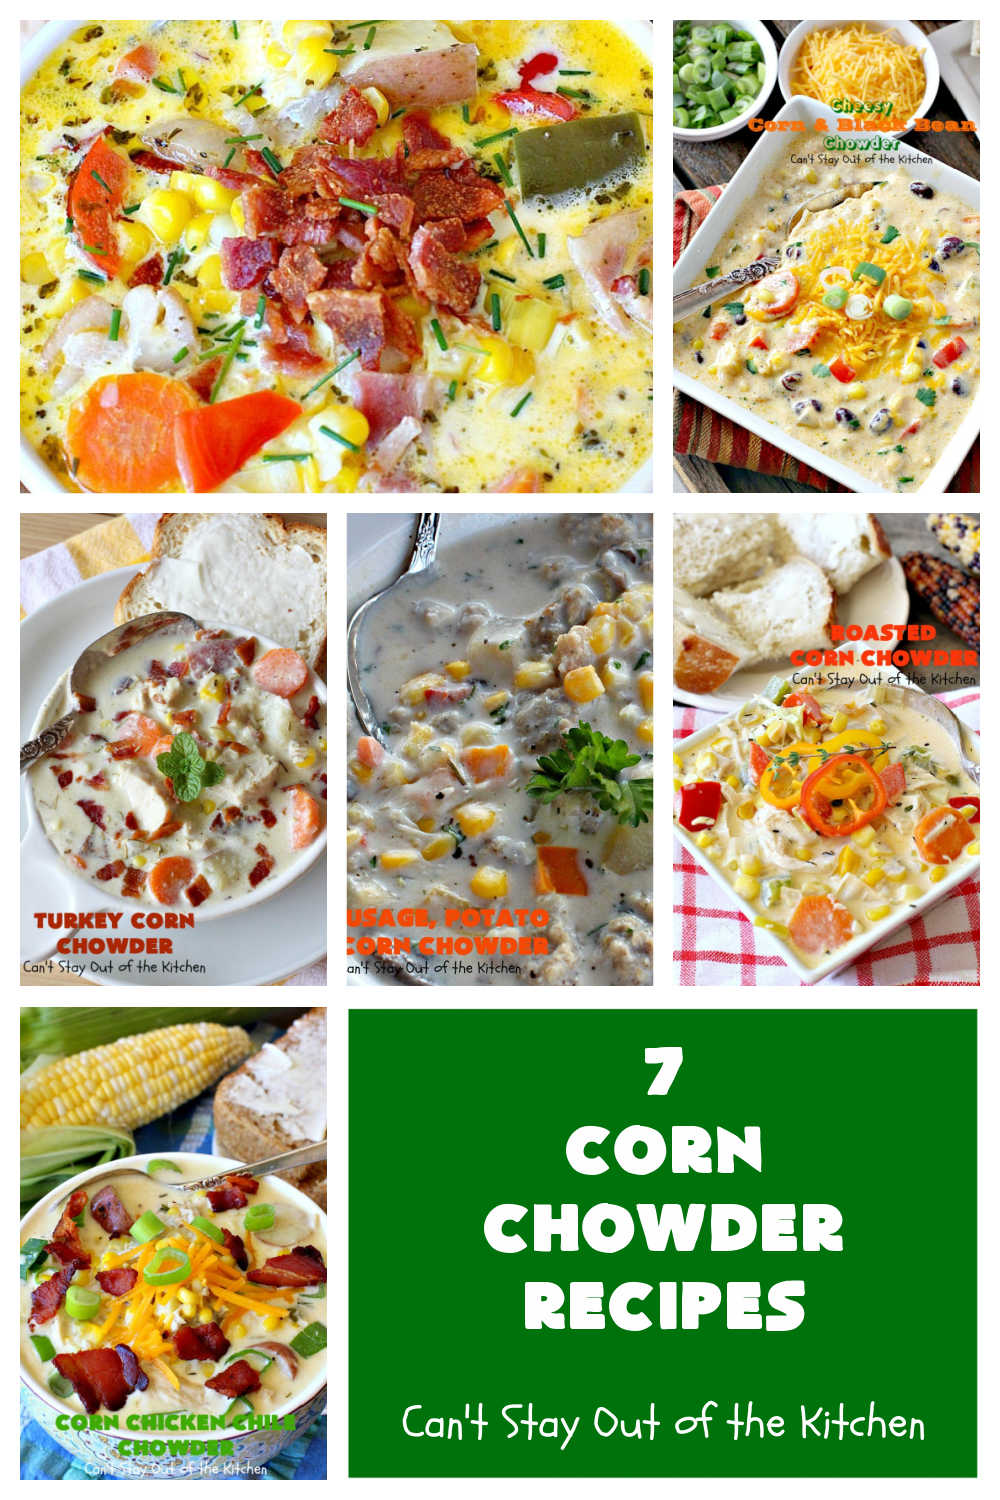 7 Corn Chowder Recipes | Can't Stay Out of the Kitchen | 7 of the tastiest #CornChowder #recipes ever! Terrific comfort food meal any time of the year! #corn #chowder #soup #7CornChowderRecipes